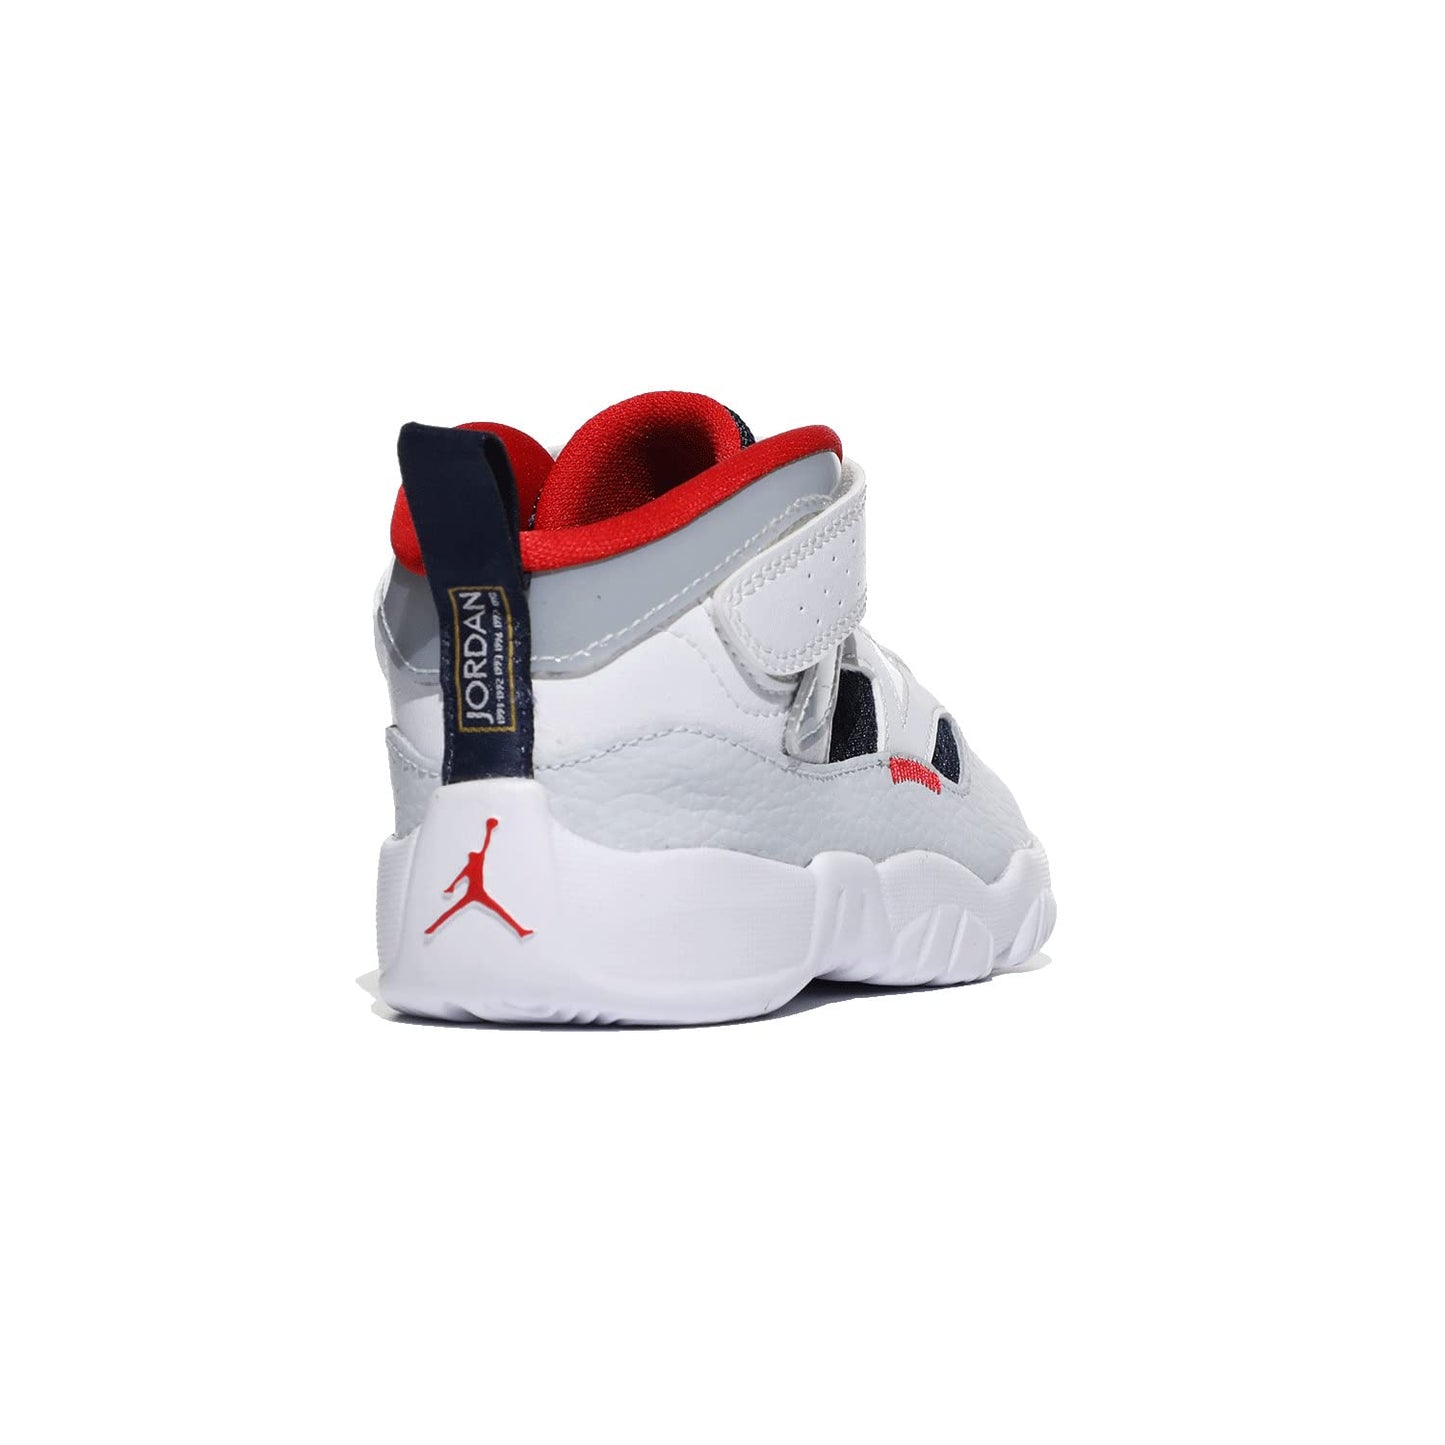 Image 4 of Jumpman Two Trey (Infant/Toddler)